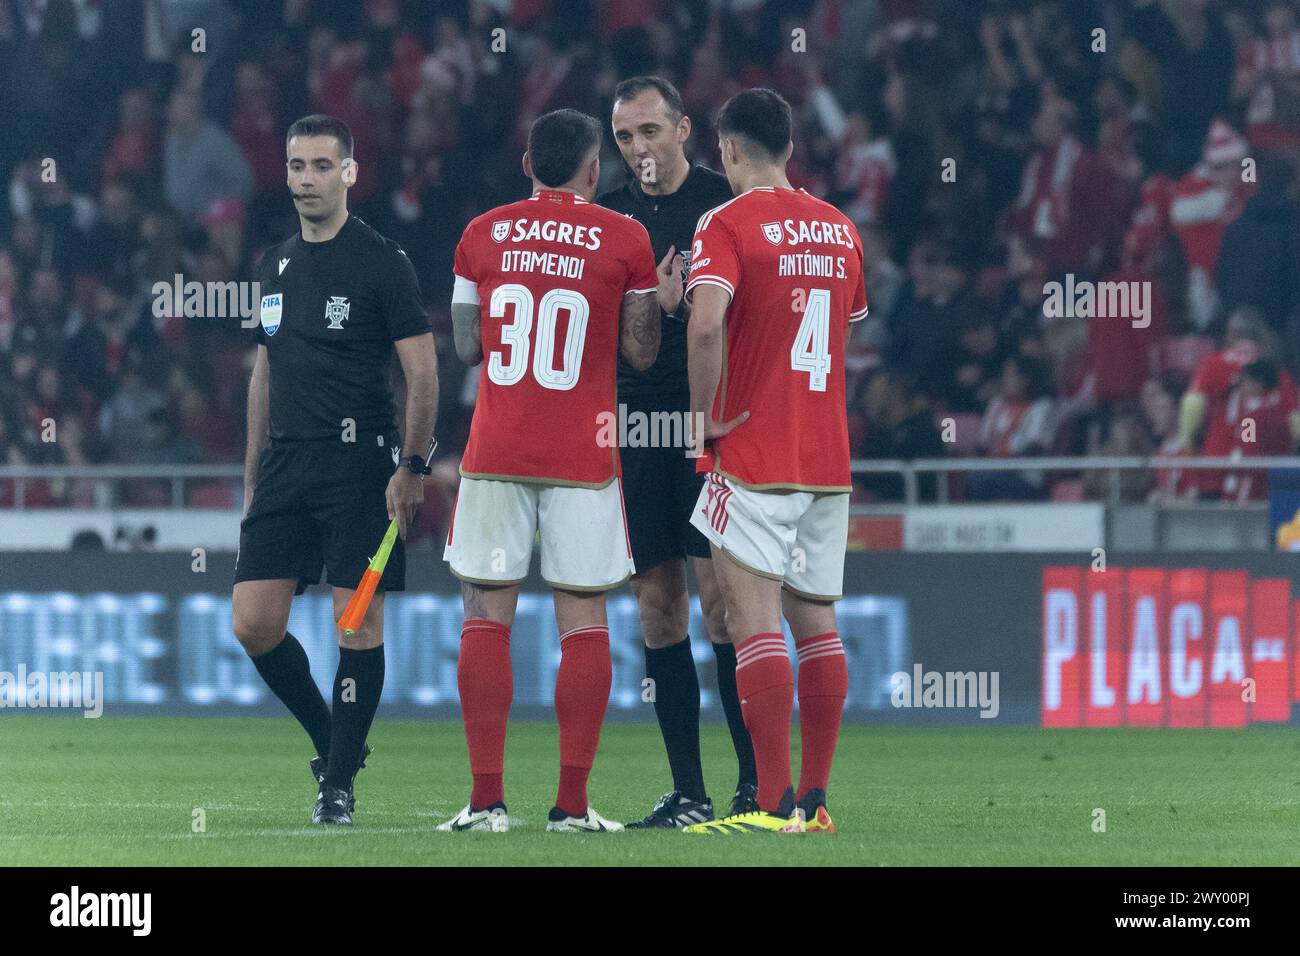 April 02, 2024. Lisbon, Portugal. Benfica's defender from Argentina Nicolas Otamendi (30), referee of the game Joao Pinheiro and Benfica's defender from Portugal Antonio Silva (4) in action during the 2nd Leg of the Semi Finals of the Portuguese Cup: Benfica vs Sporting Credit: Alexandre de Sousa/Alamy Live News Stock Photo